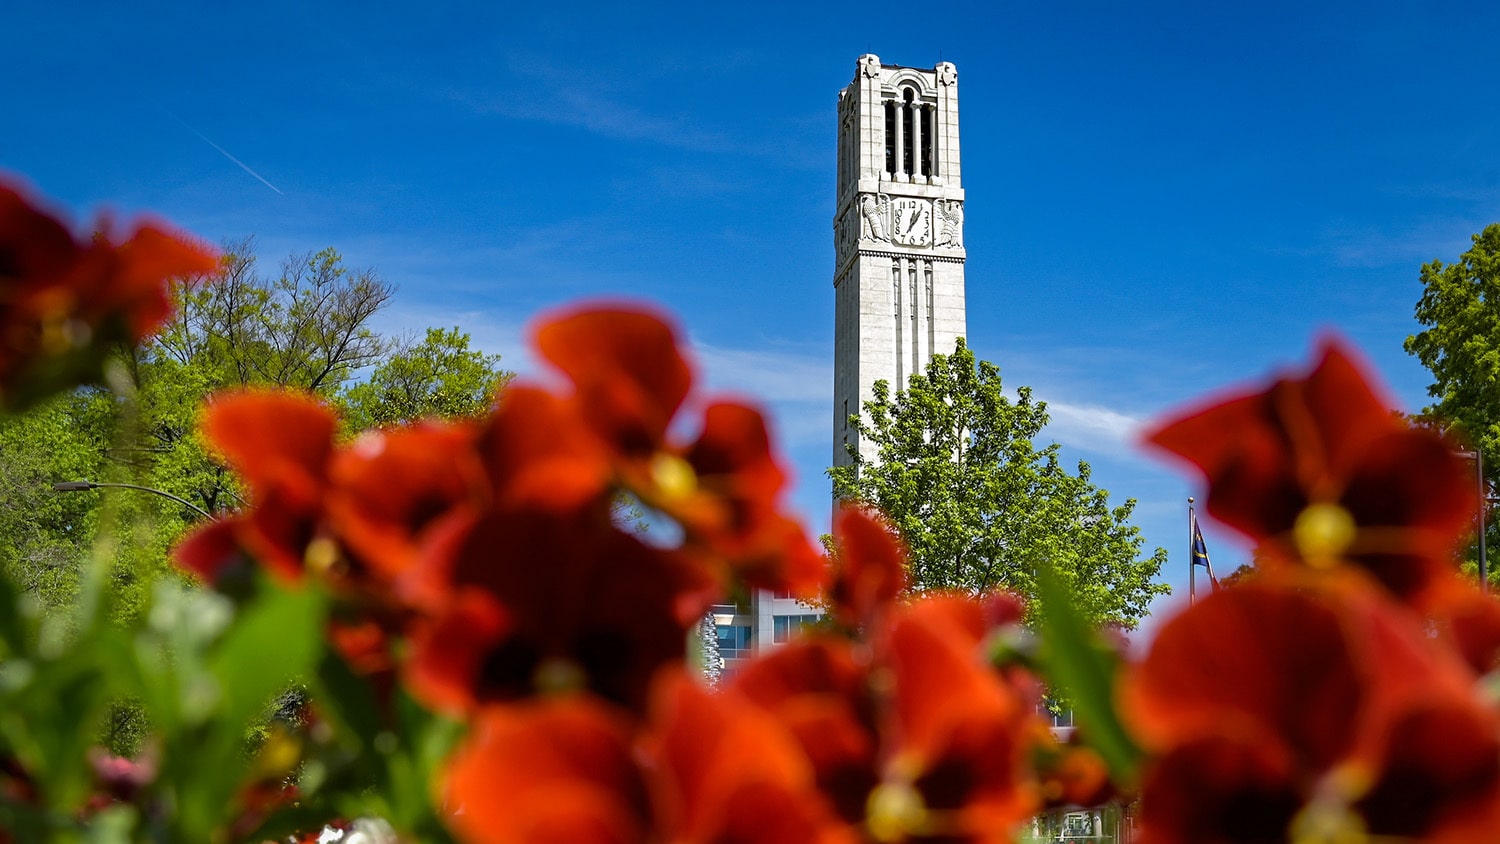 NC State Belltower view with flowers